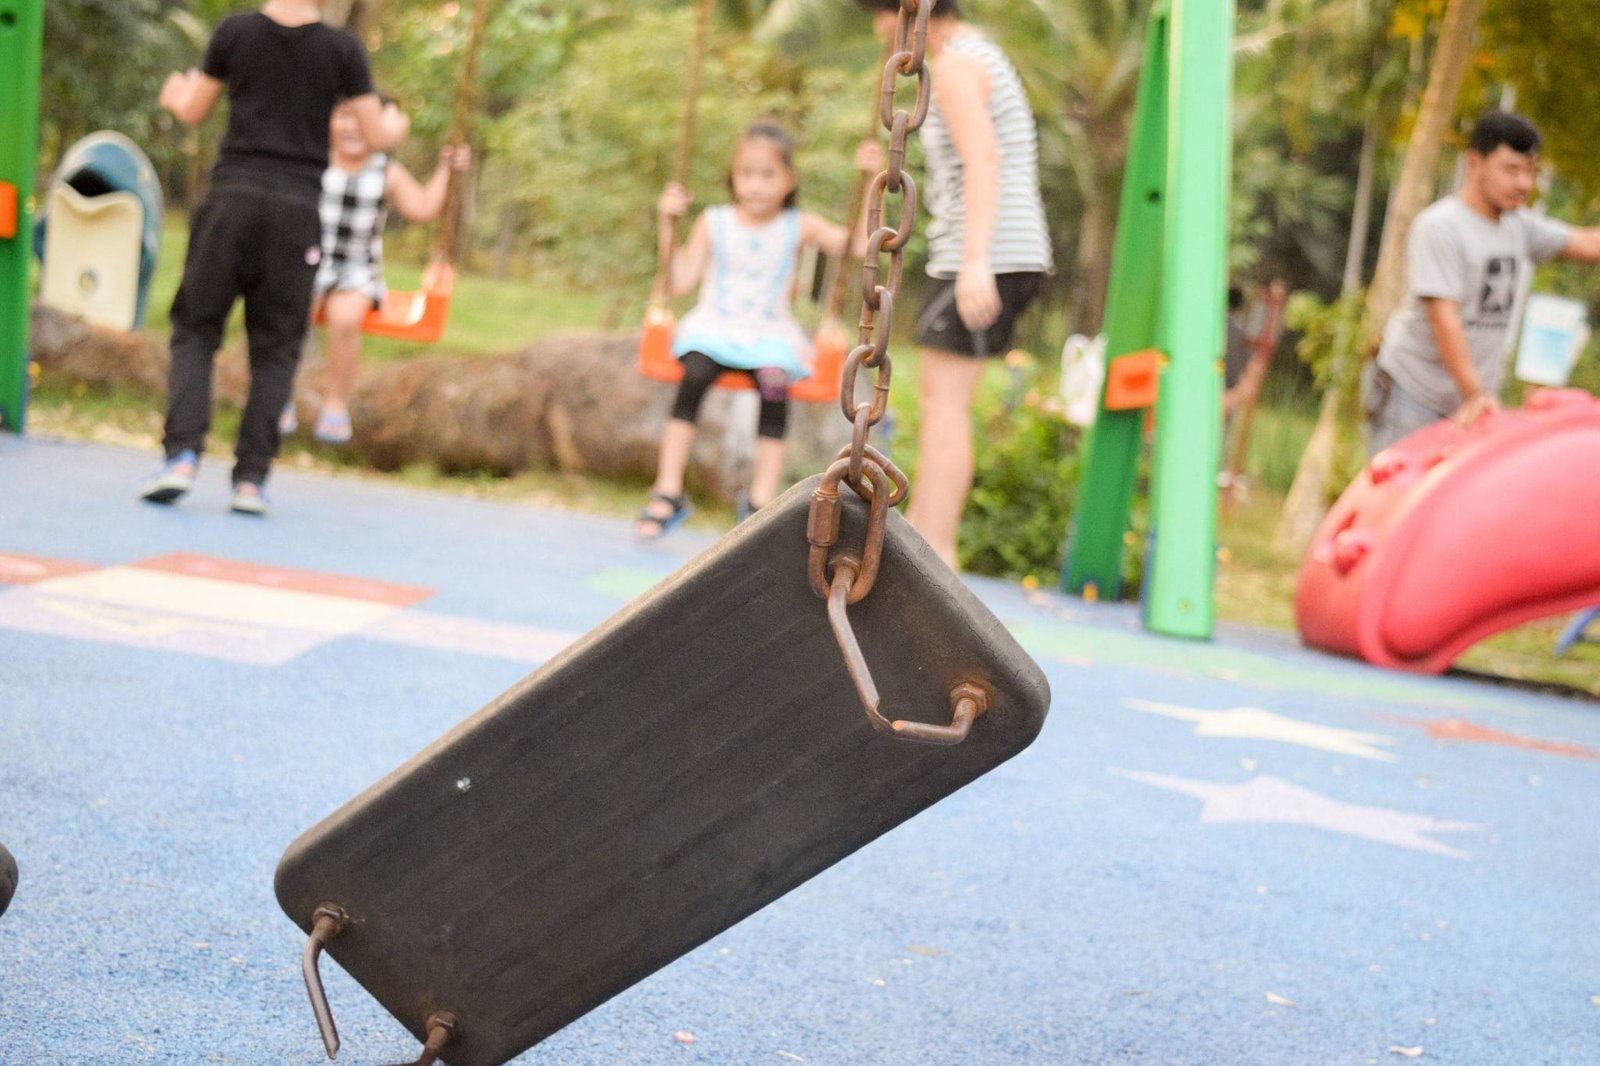 Playground accidents and ways to avoid the hazard